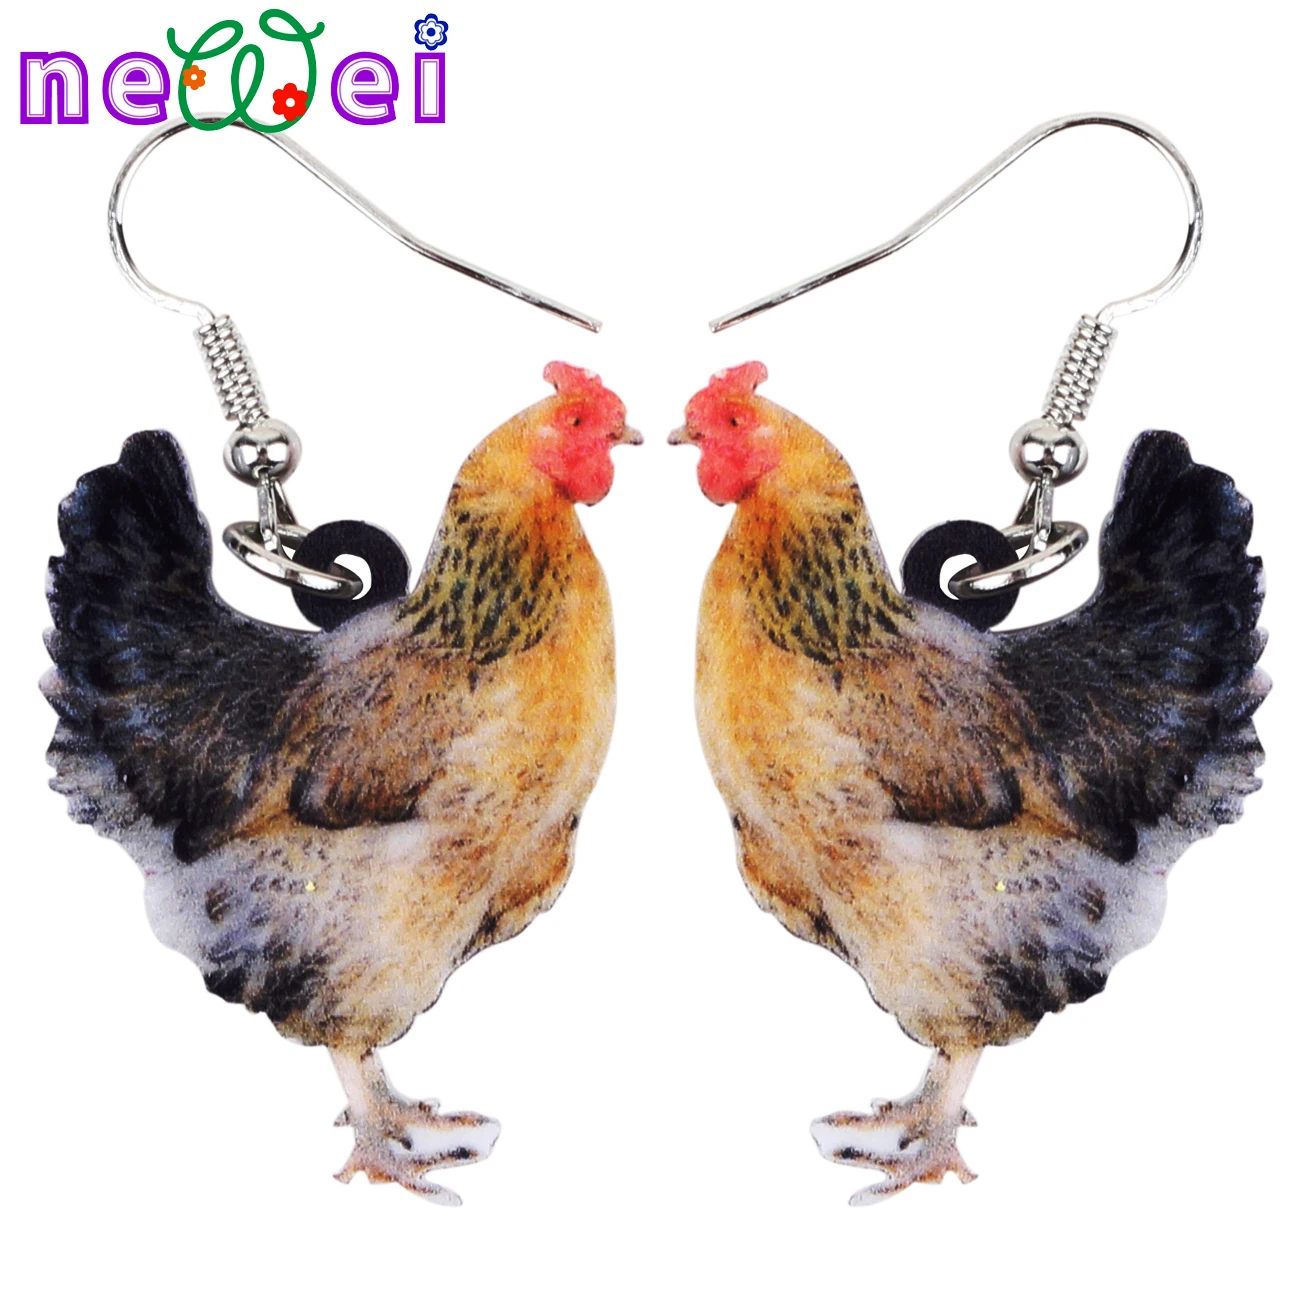 

Acrylic Elegant Chicken Hen Earrings Big Long Dangle Drop Farm Animals Jewelry For Girls Women Ladies Teens Party Charms Gifts, Multicolor